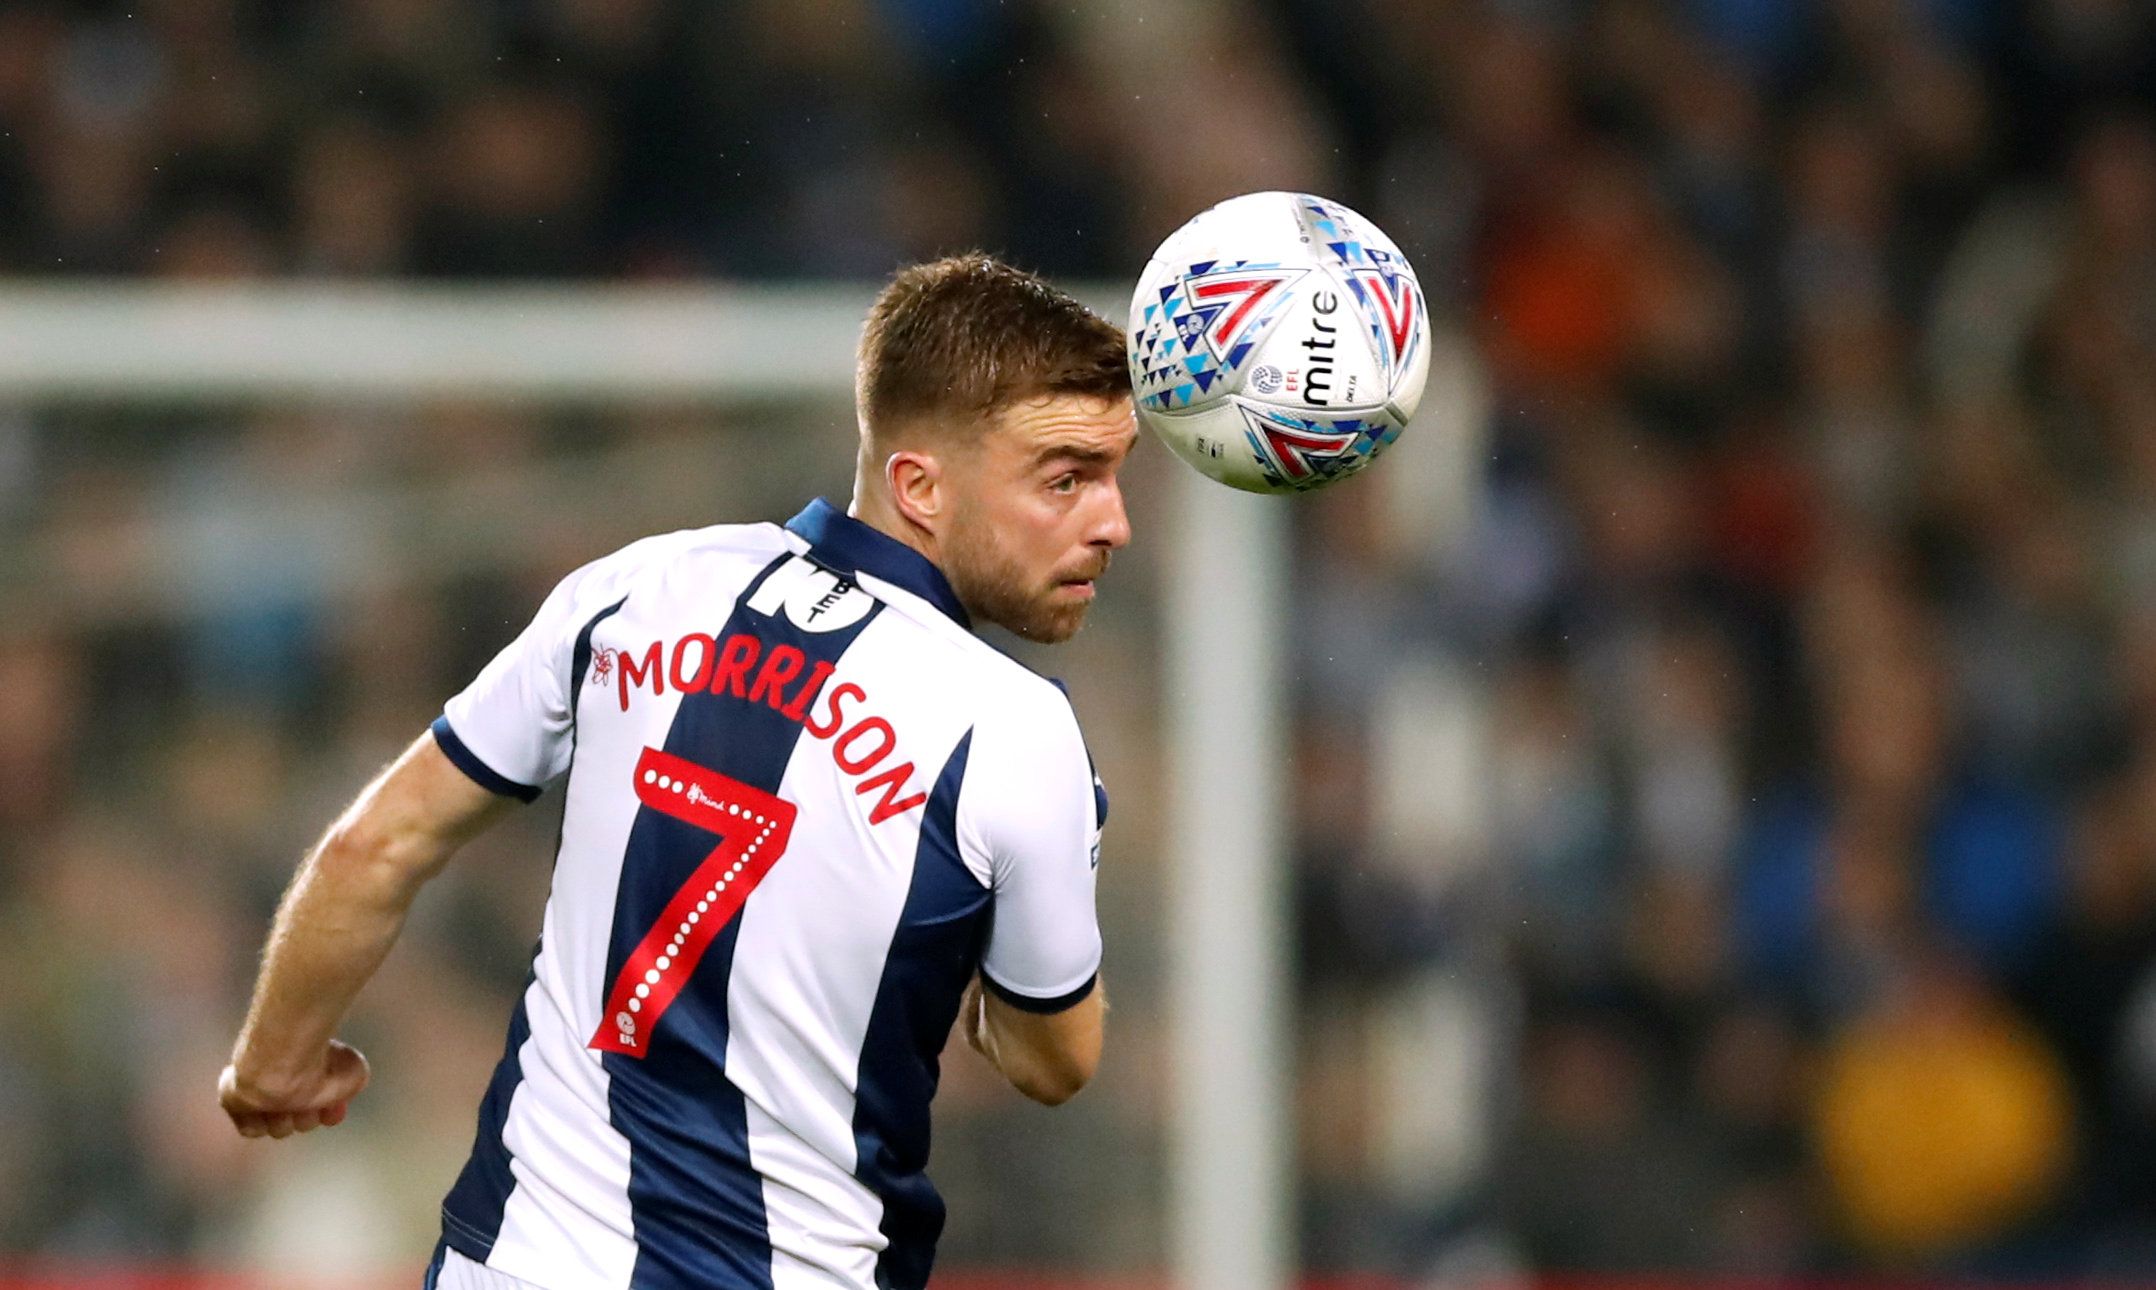 Soccer Football - Championship - West Bromwich Albion v Birmingham City - The Hawthorns, West Bromwich, Britain - March 29, 2019   West Bromwich Albion's James Morrison   Action Images/Andrew Boyers    EDITORIAL USE ONLY. No use with unauthorized audio, video, data, fixture lists, club/league logos or 